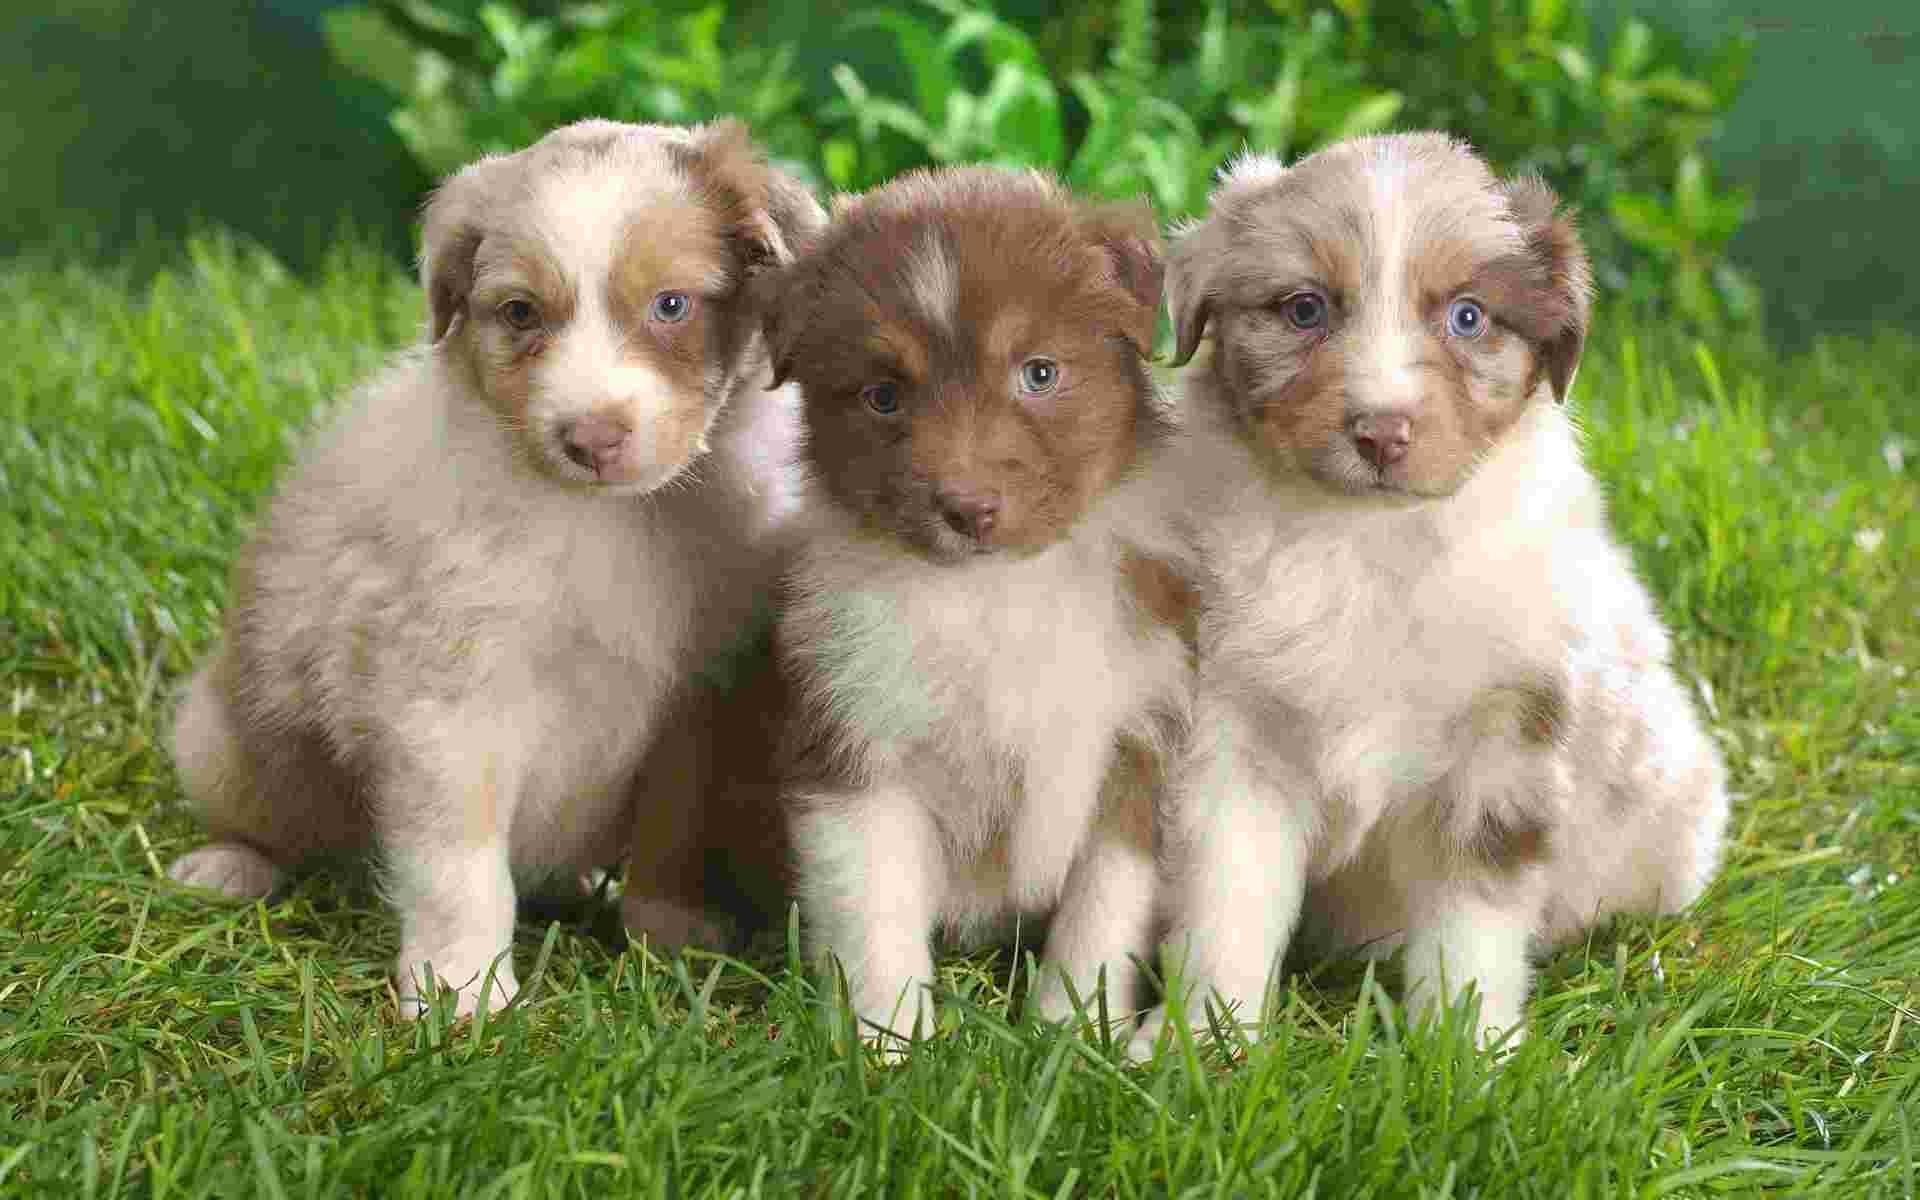 1920x1200  2 dog Wallpapers - Download free 2 dog cute puppies wallpapers .